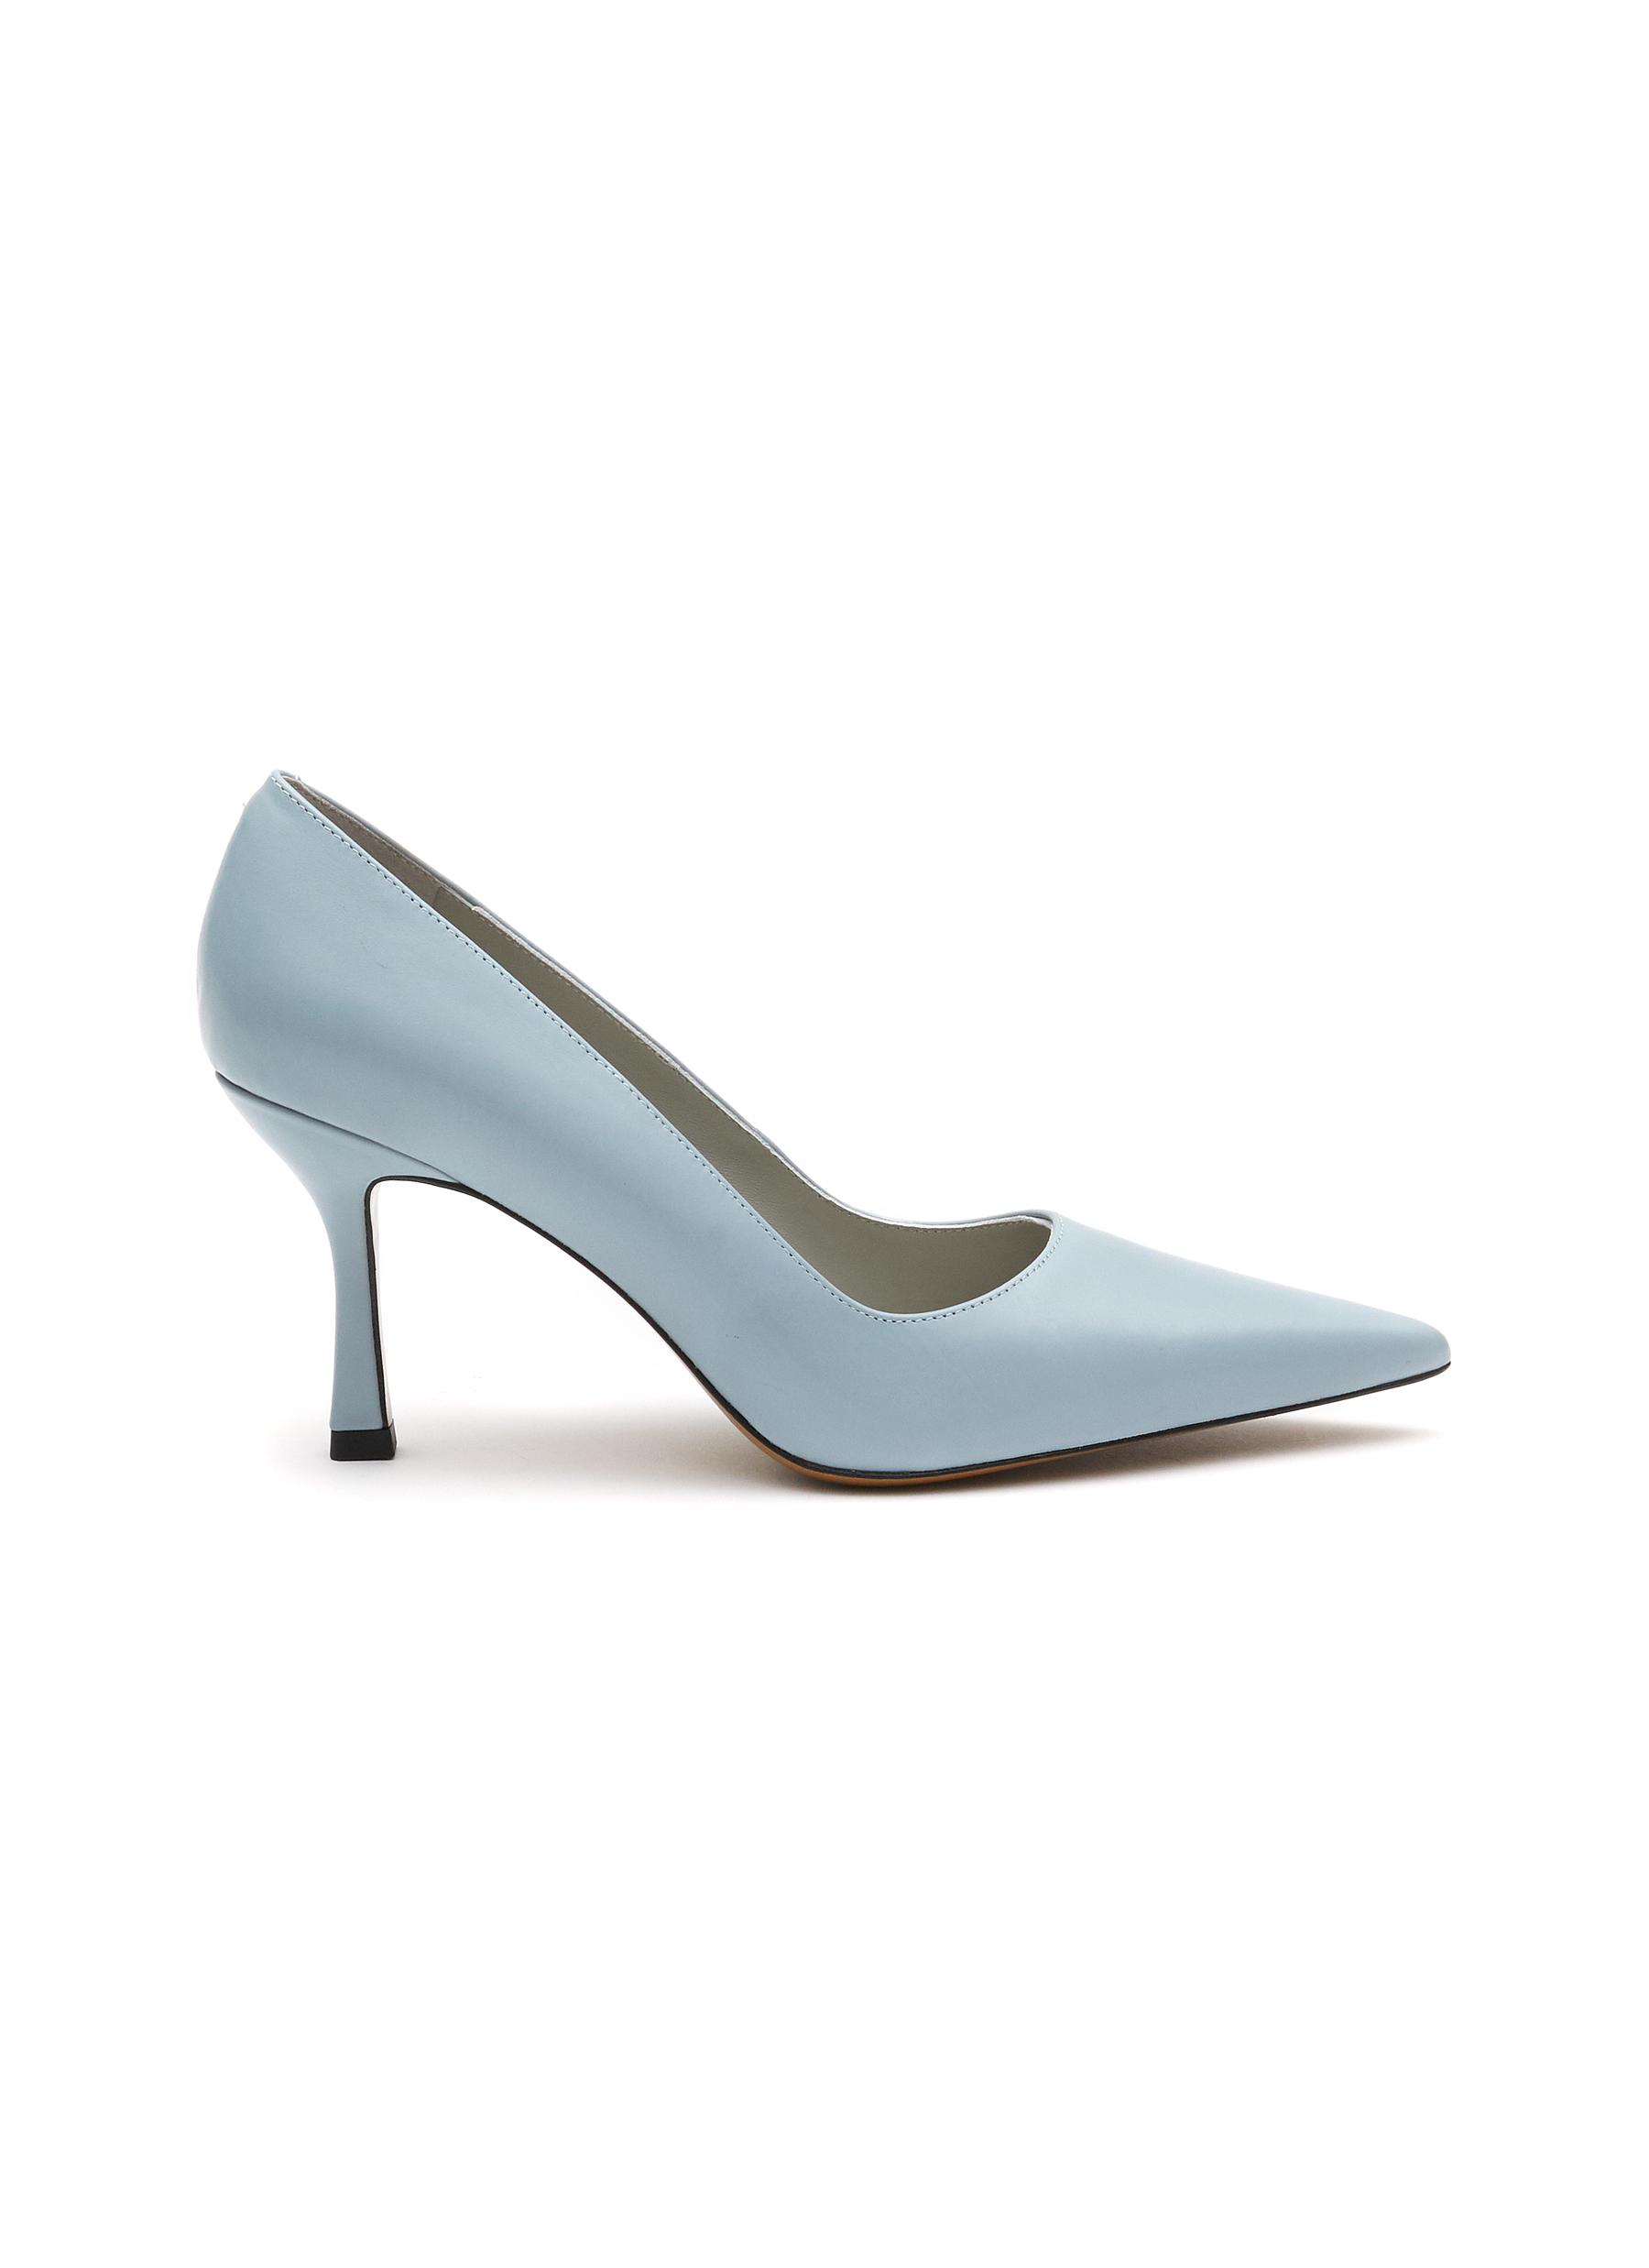 EQUIL ‘MILANO' POINT TOE LEATHER PUMPS